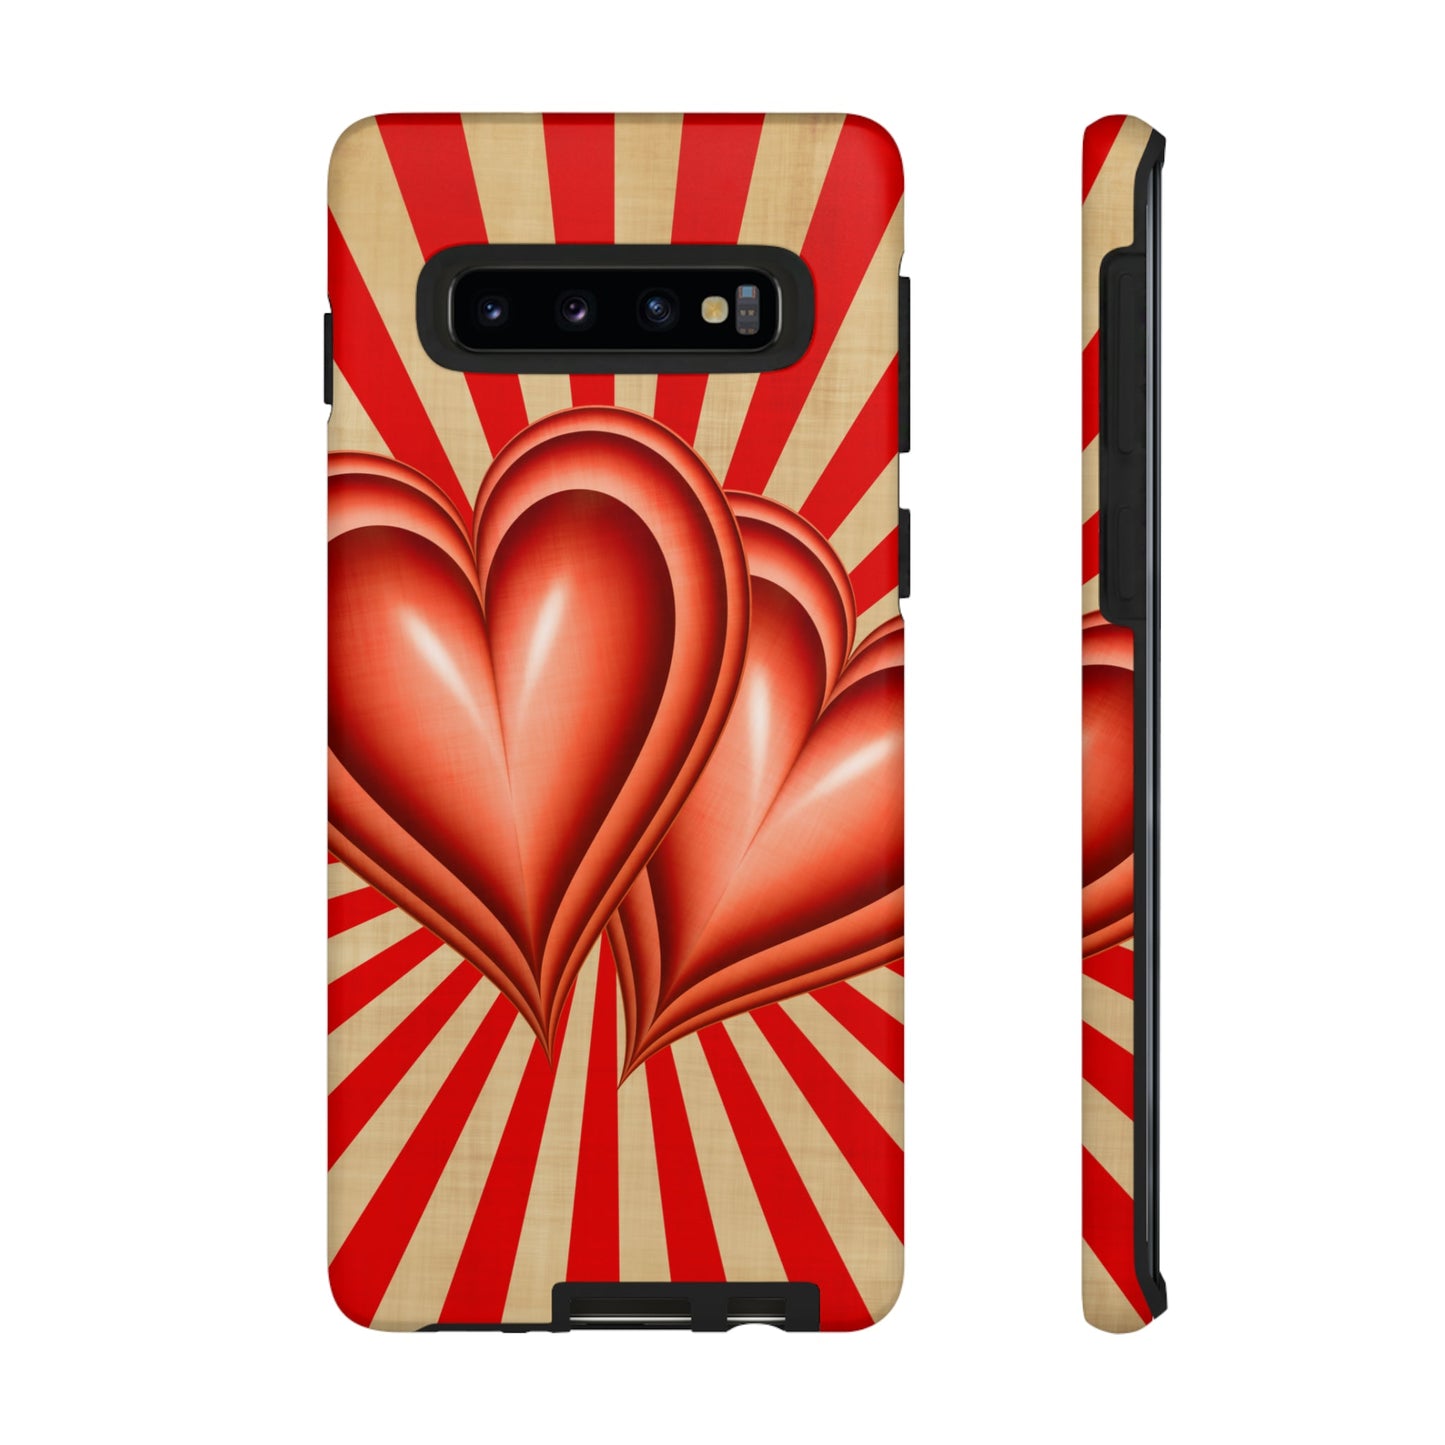 Happy Valentin's Day Tough Cases iPhone and Samsung-Shalav5